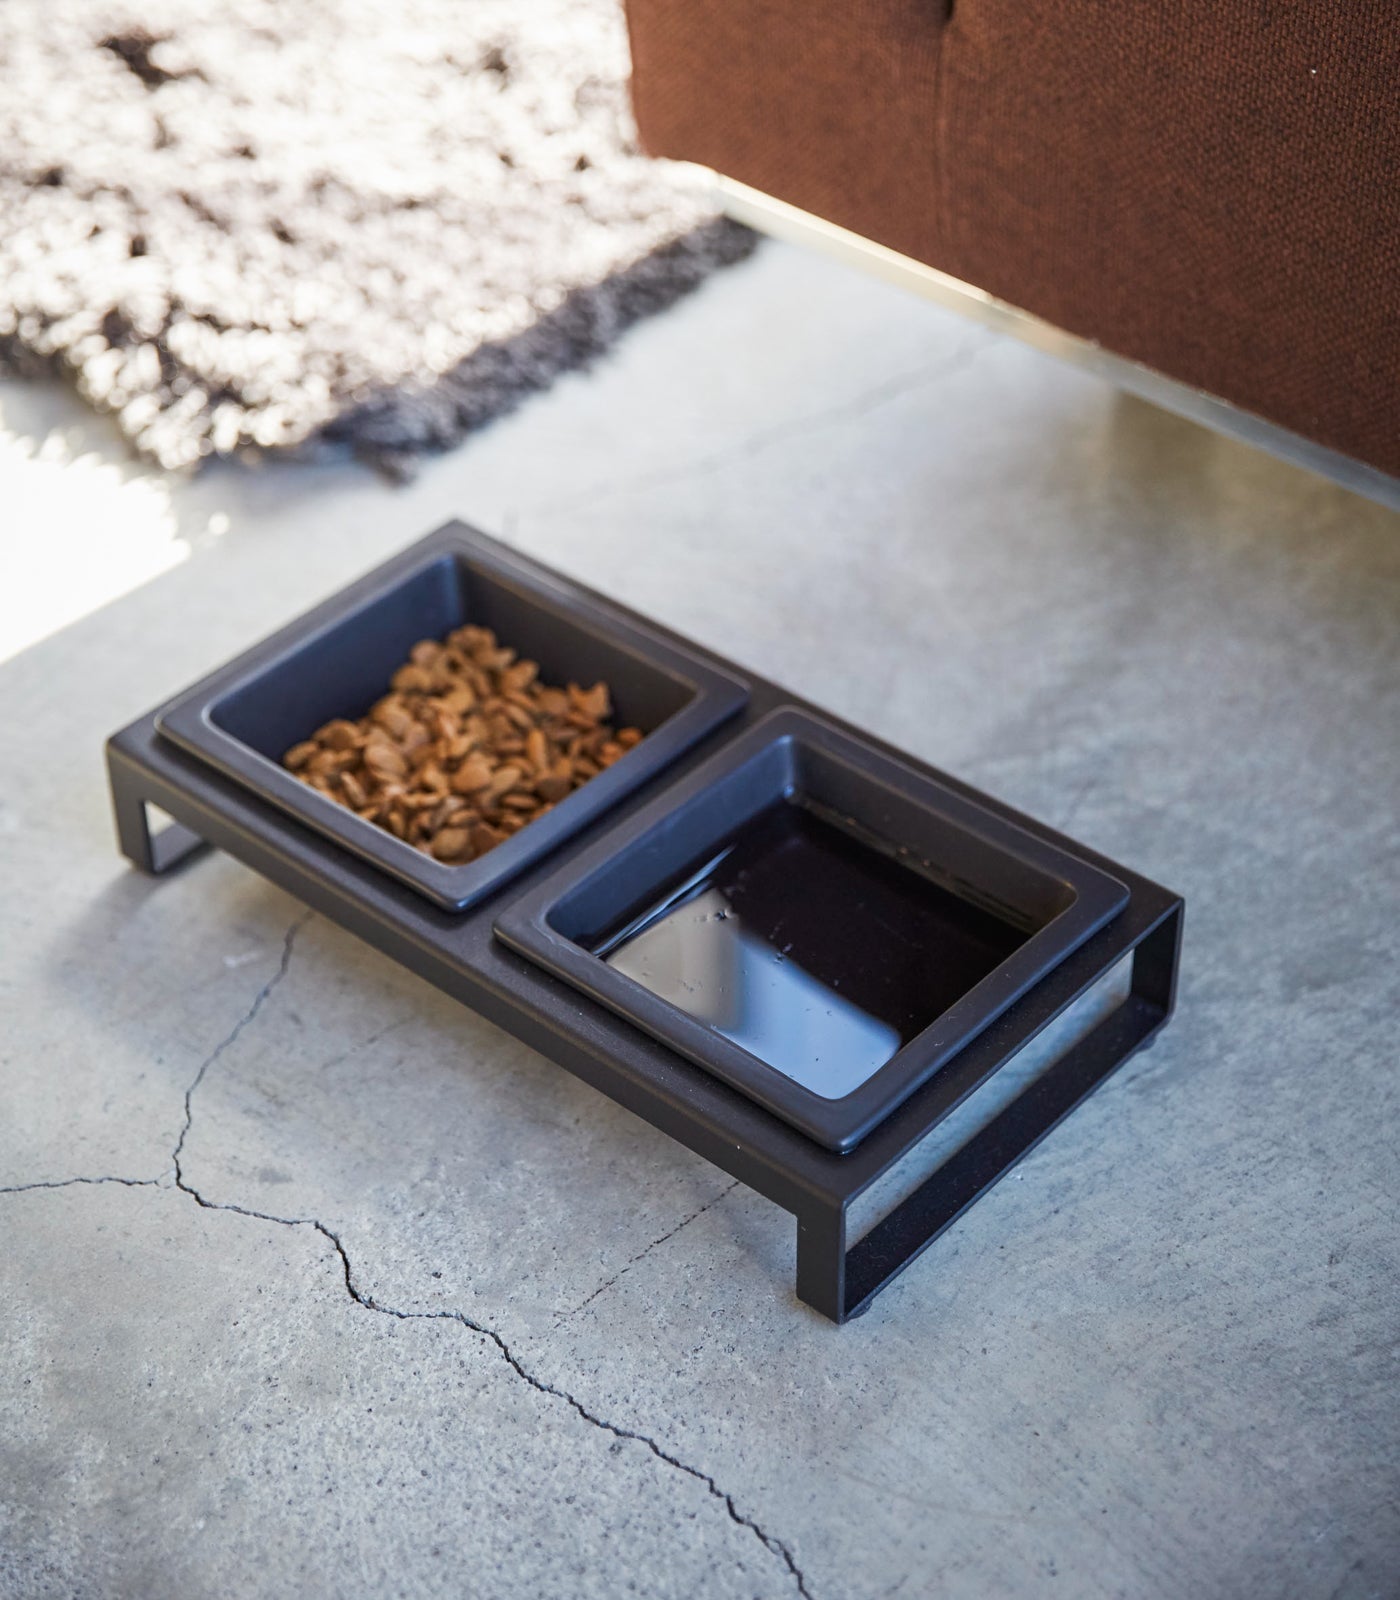 Modern Yamazaki Home pet feeding station with separate ceramic bowls for food and water on a concrete floor, ideal for small dogs.